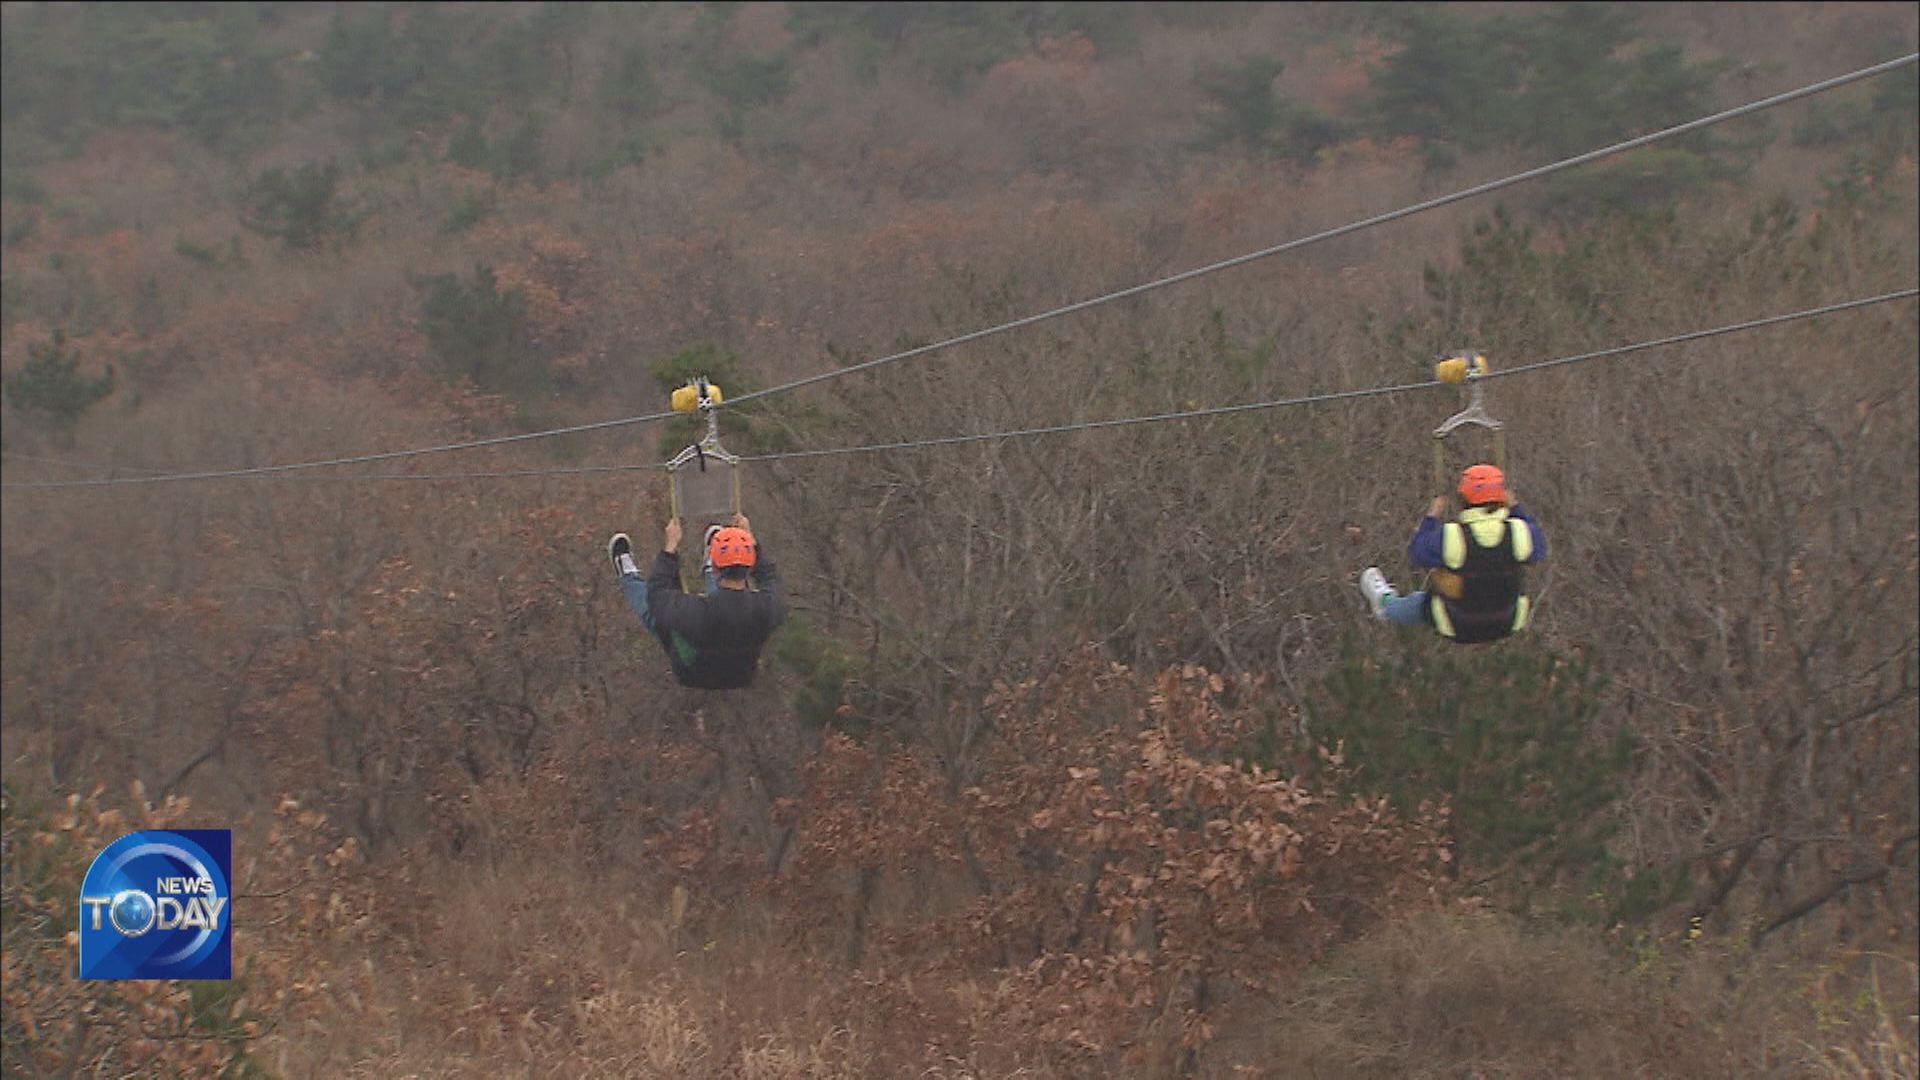 SAFETY CONCERNS SURROUNDING ZIP LINES